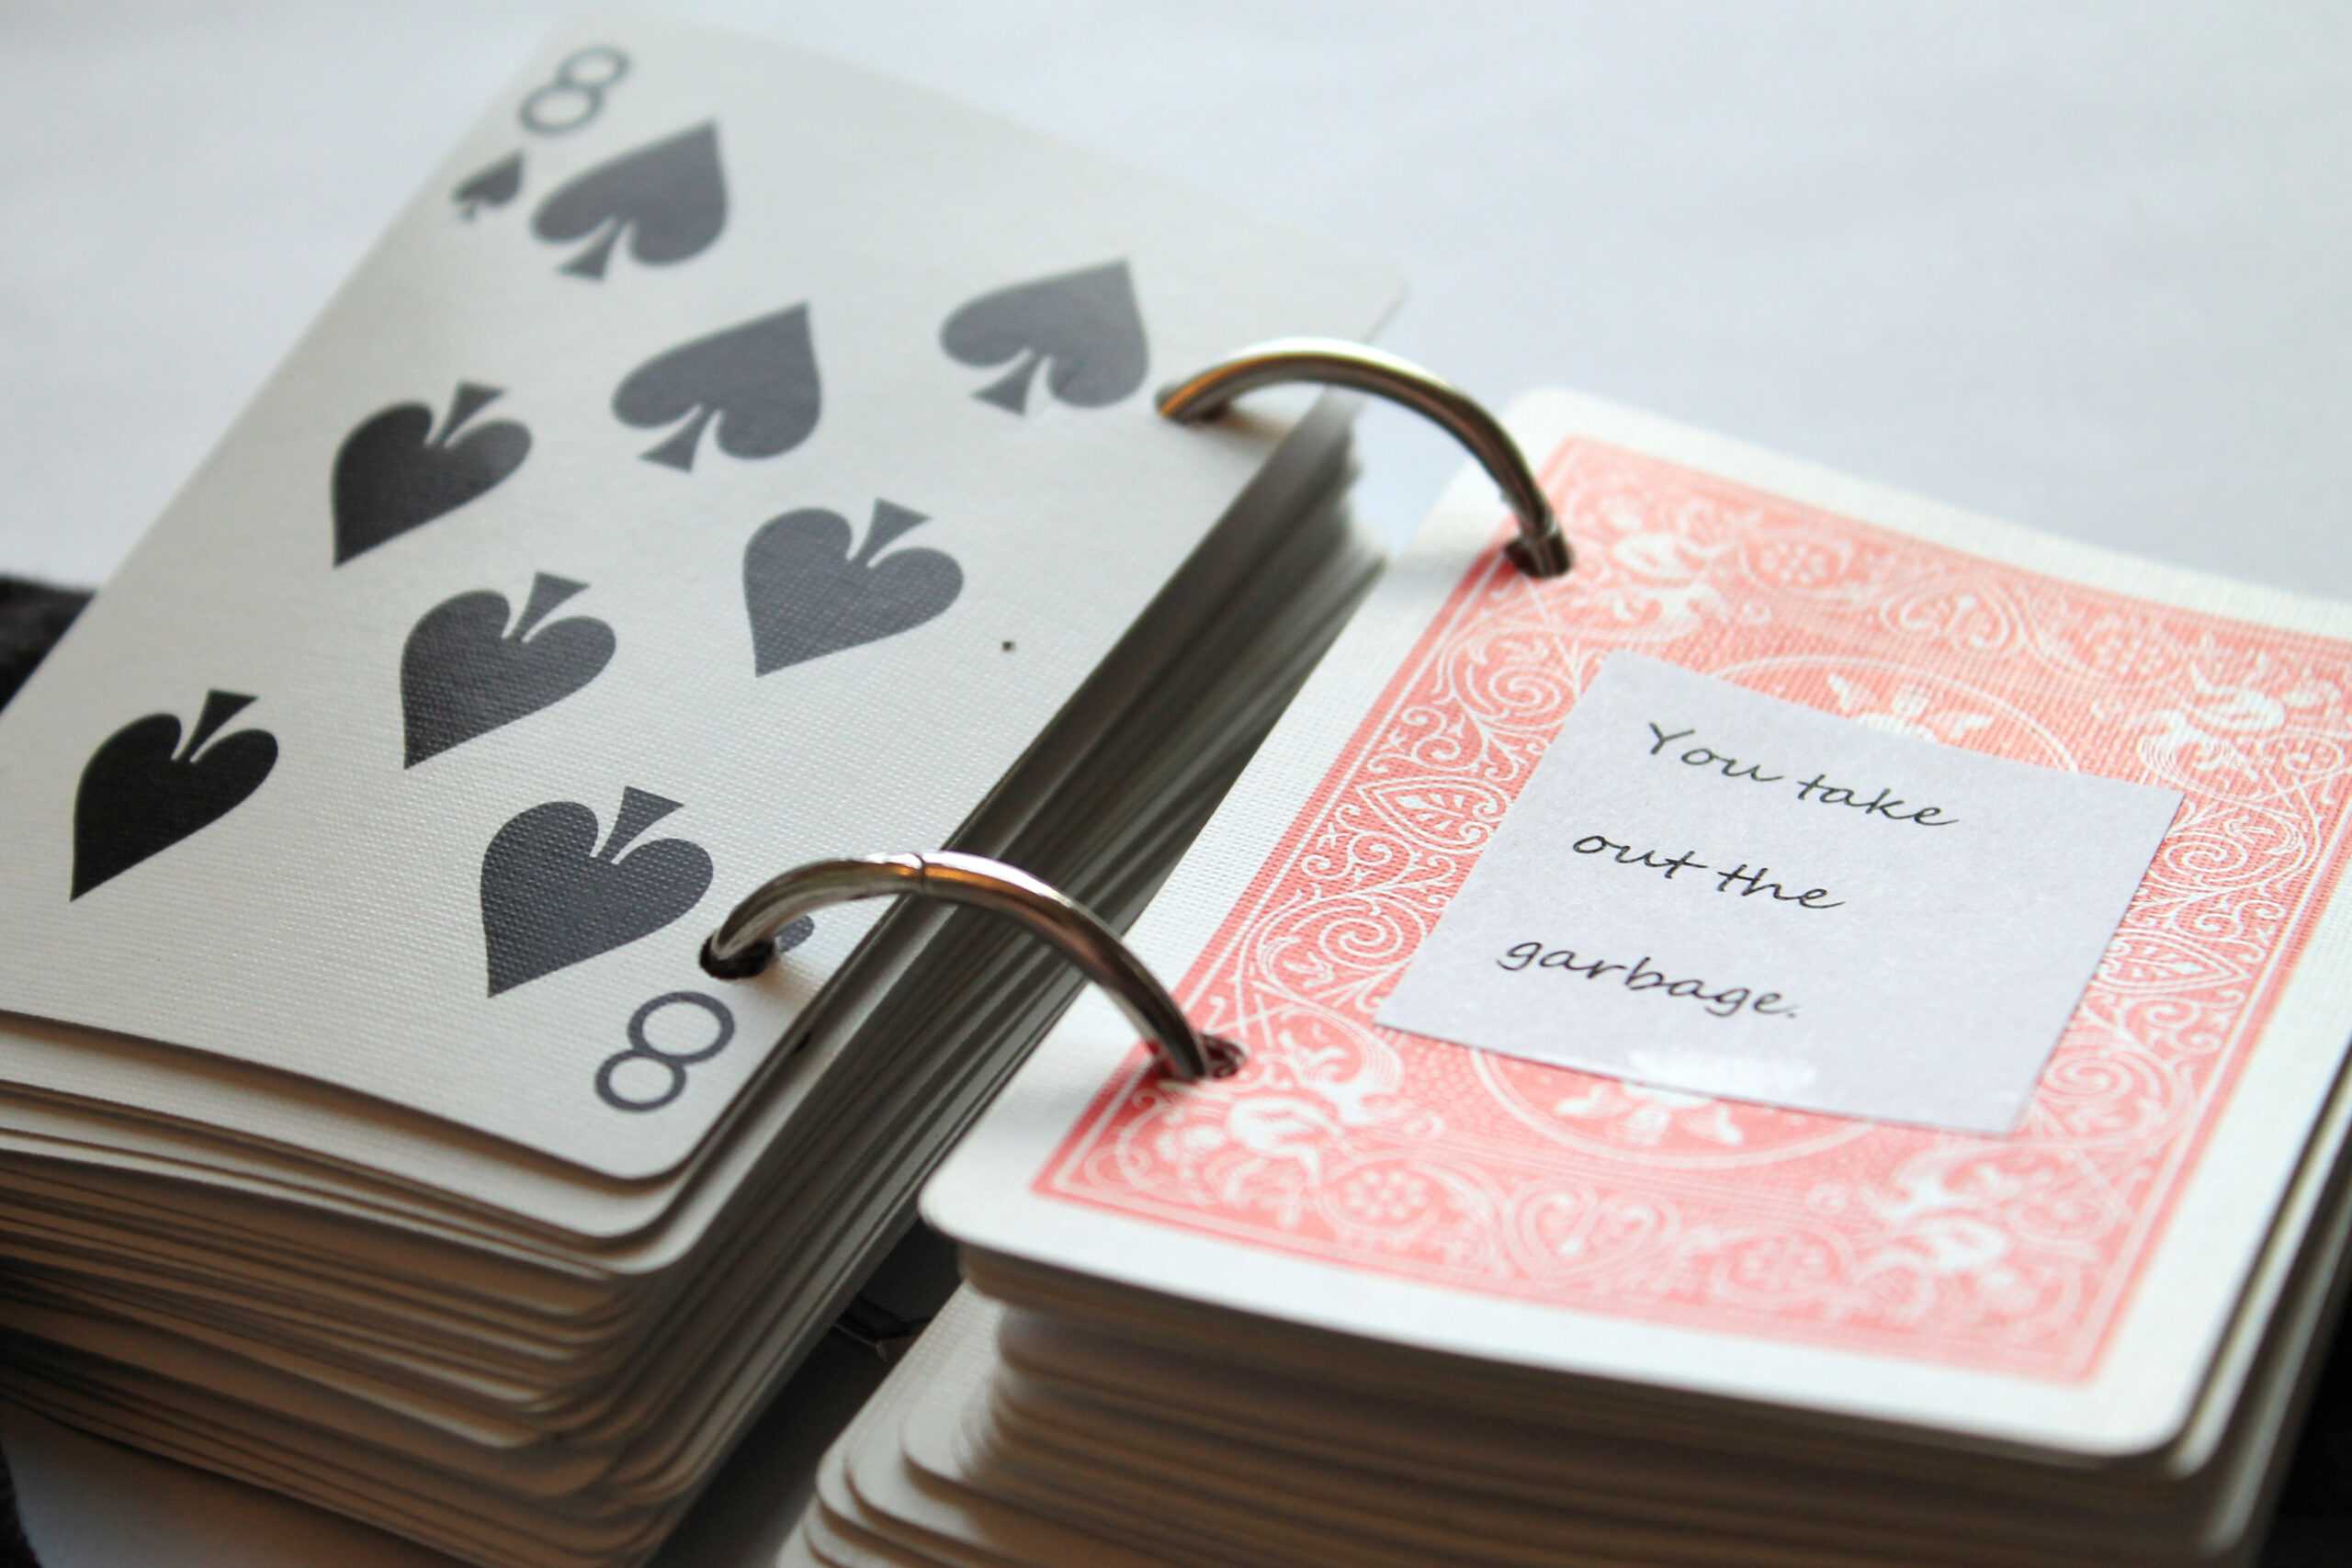 52 Reasons I Love You – Playing Card Book Tutorial Throughout 52 Things I Love About You Deck Of Cards Template